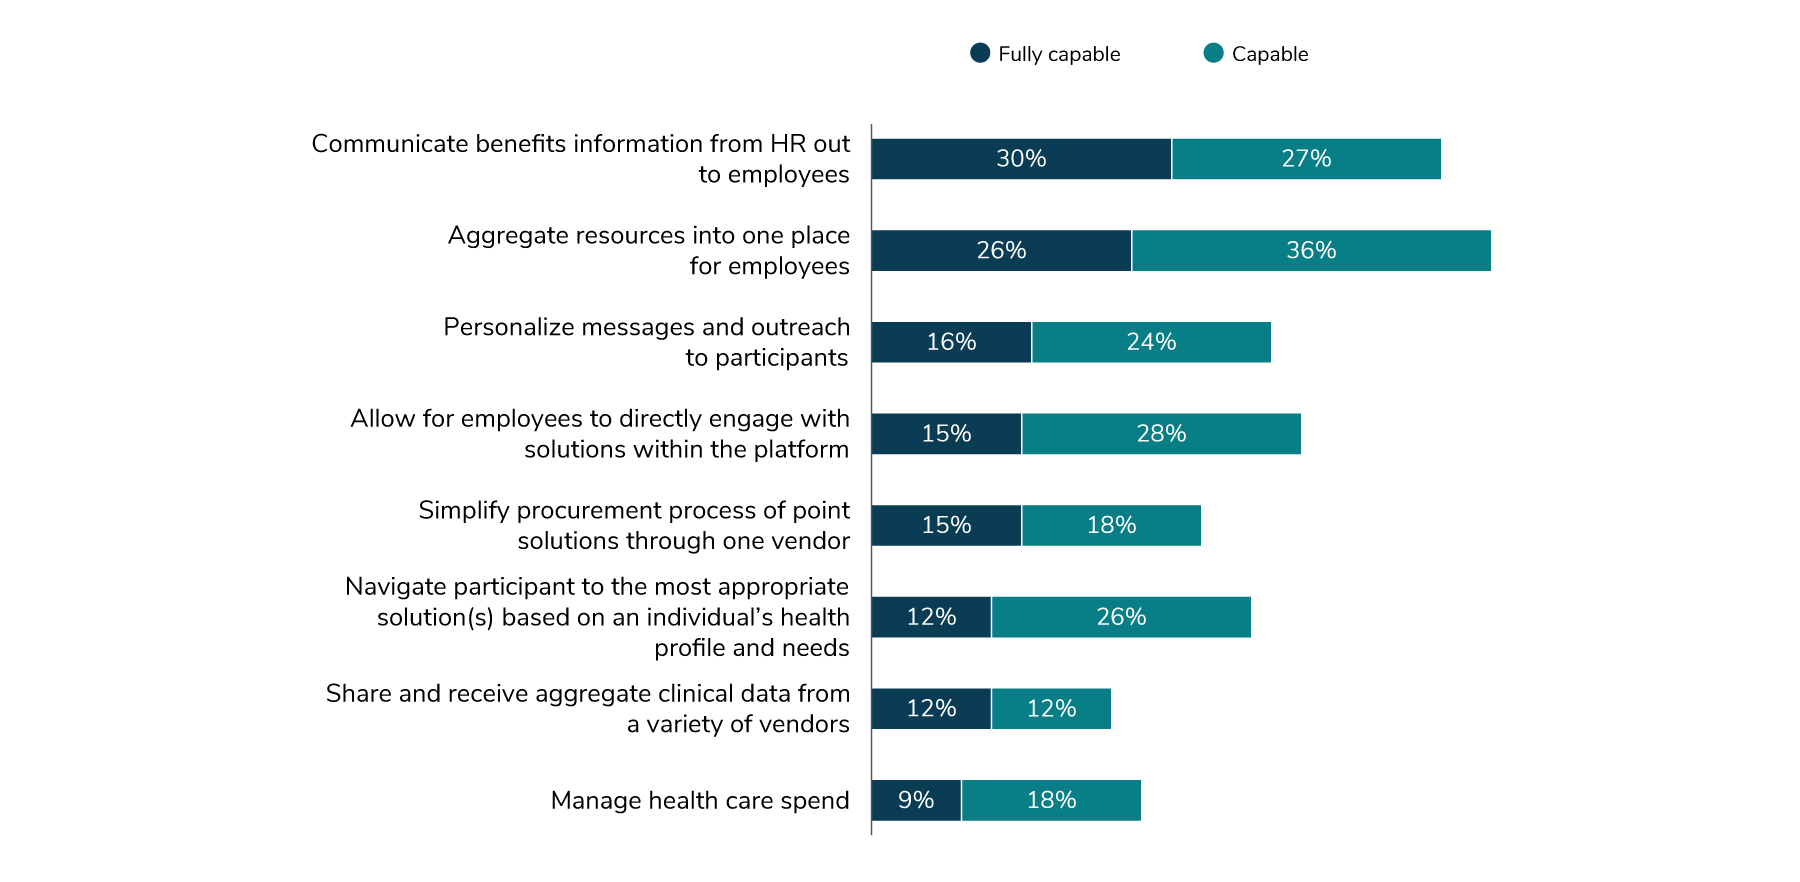 57% of employers with an engagement platform believe that platforms are capable of communicating benefits information from HR out to employees. 62% believe that they are capable of aggregating resources into one place for employees. 40% believe they are capable of personalizing messages and outreaches to participants.